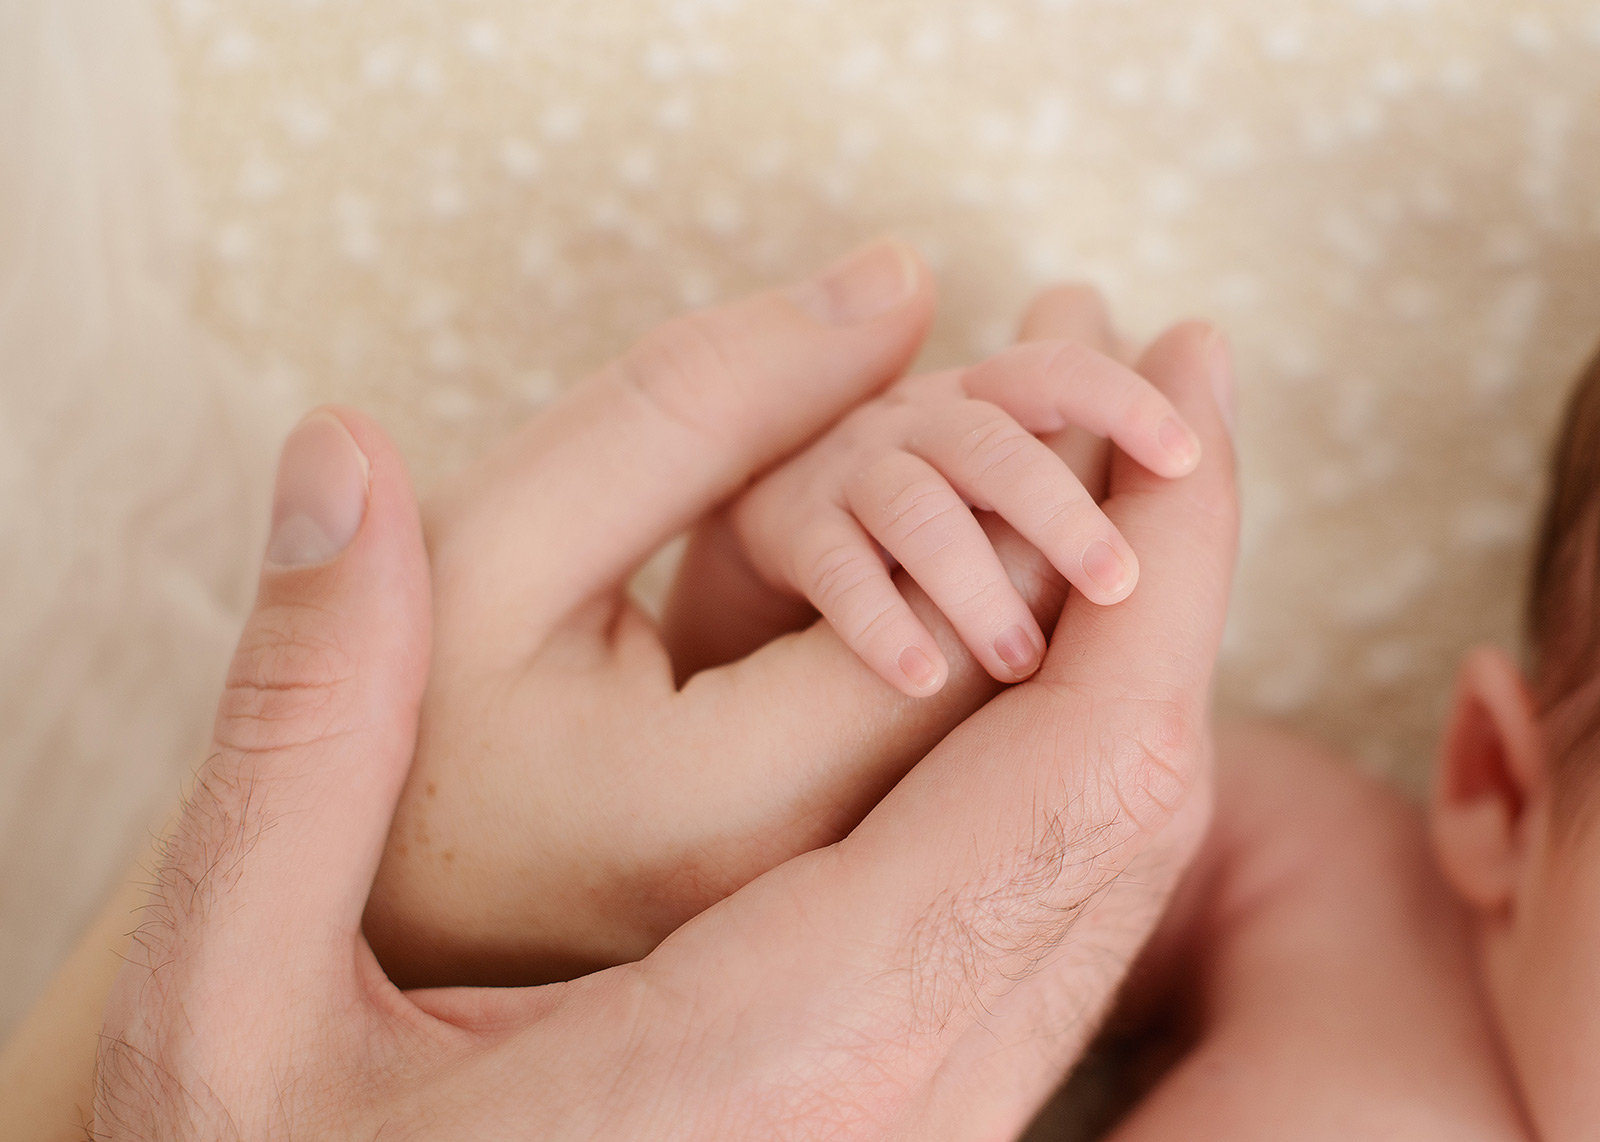 Newborn baby close up of hands with parents hands